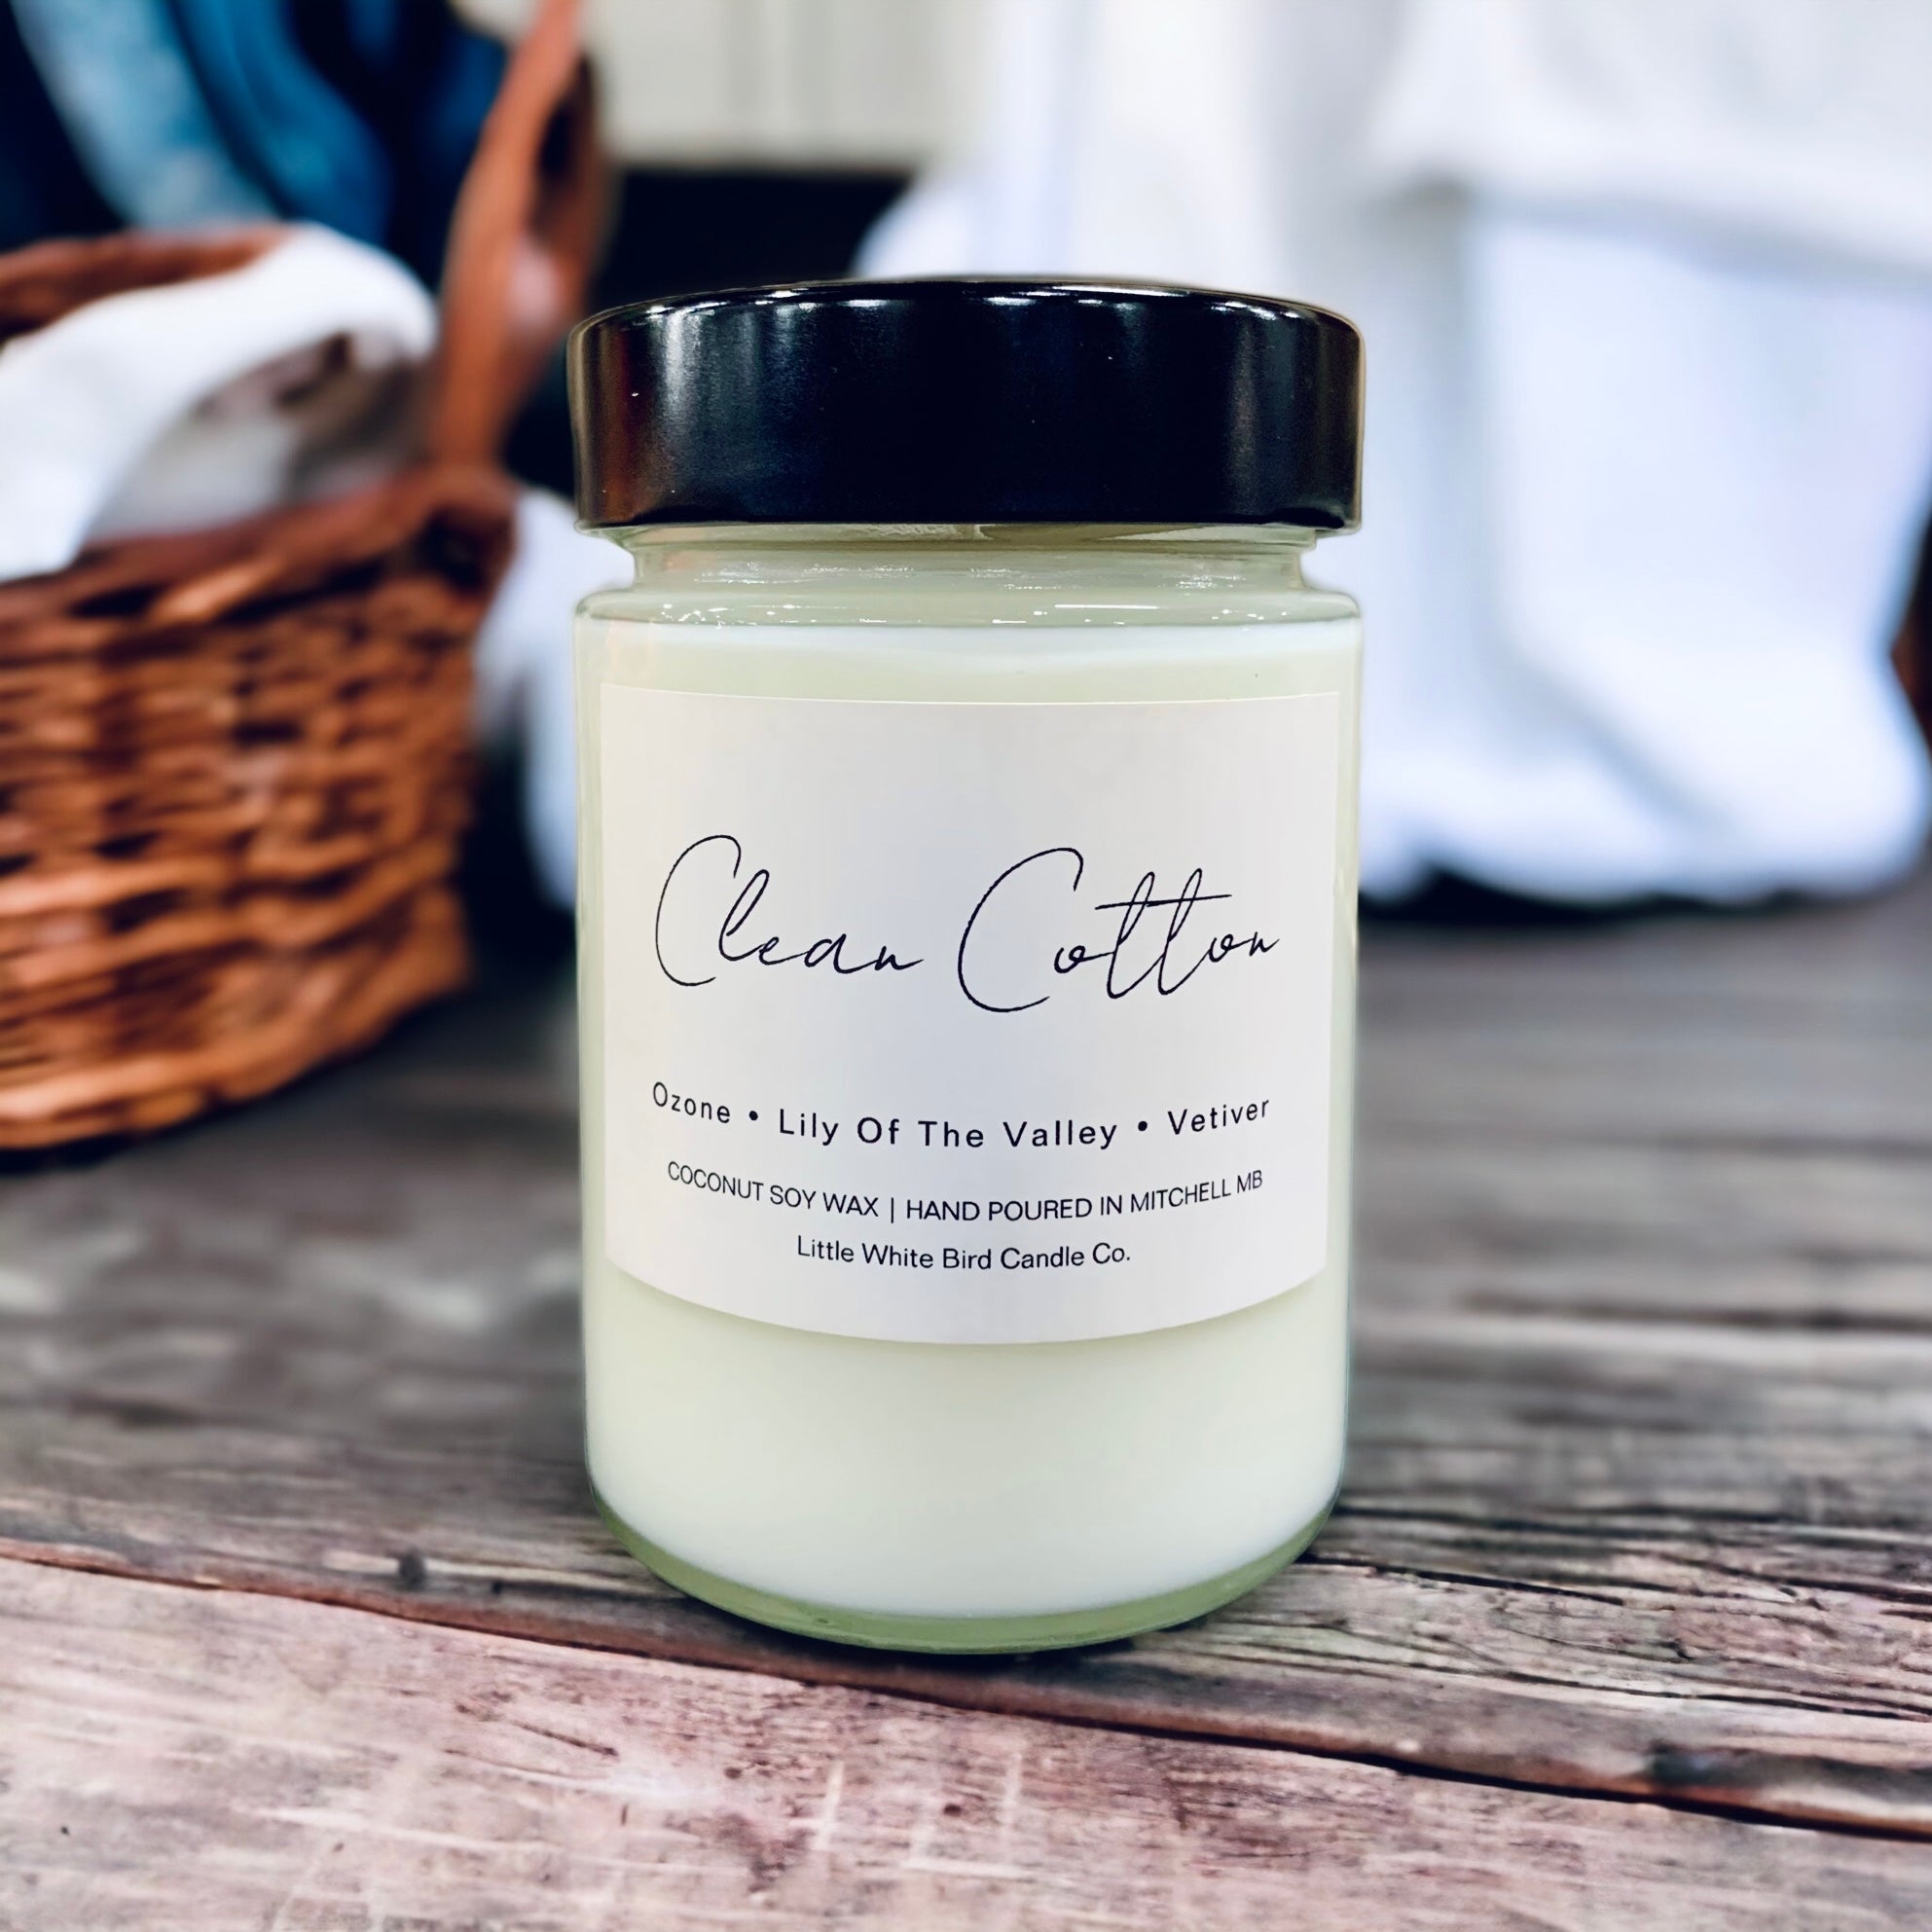 10oz Clean Cotton Candle • Ozone • Lily Of The Valley • Vetiver